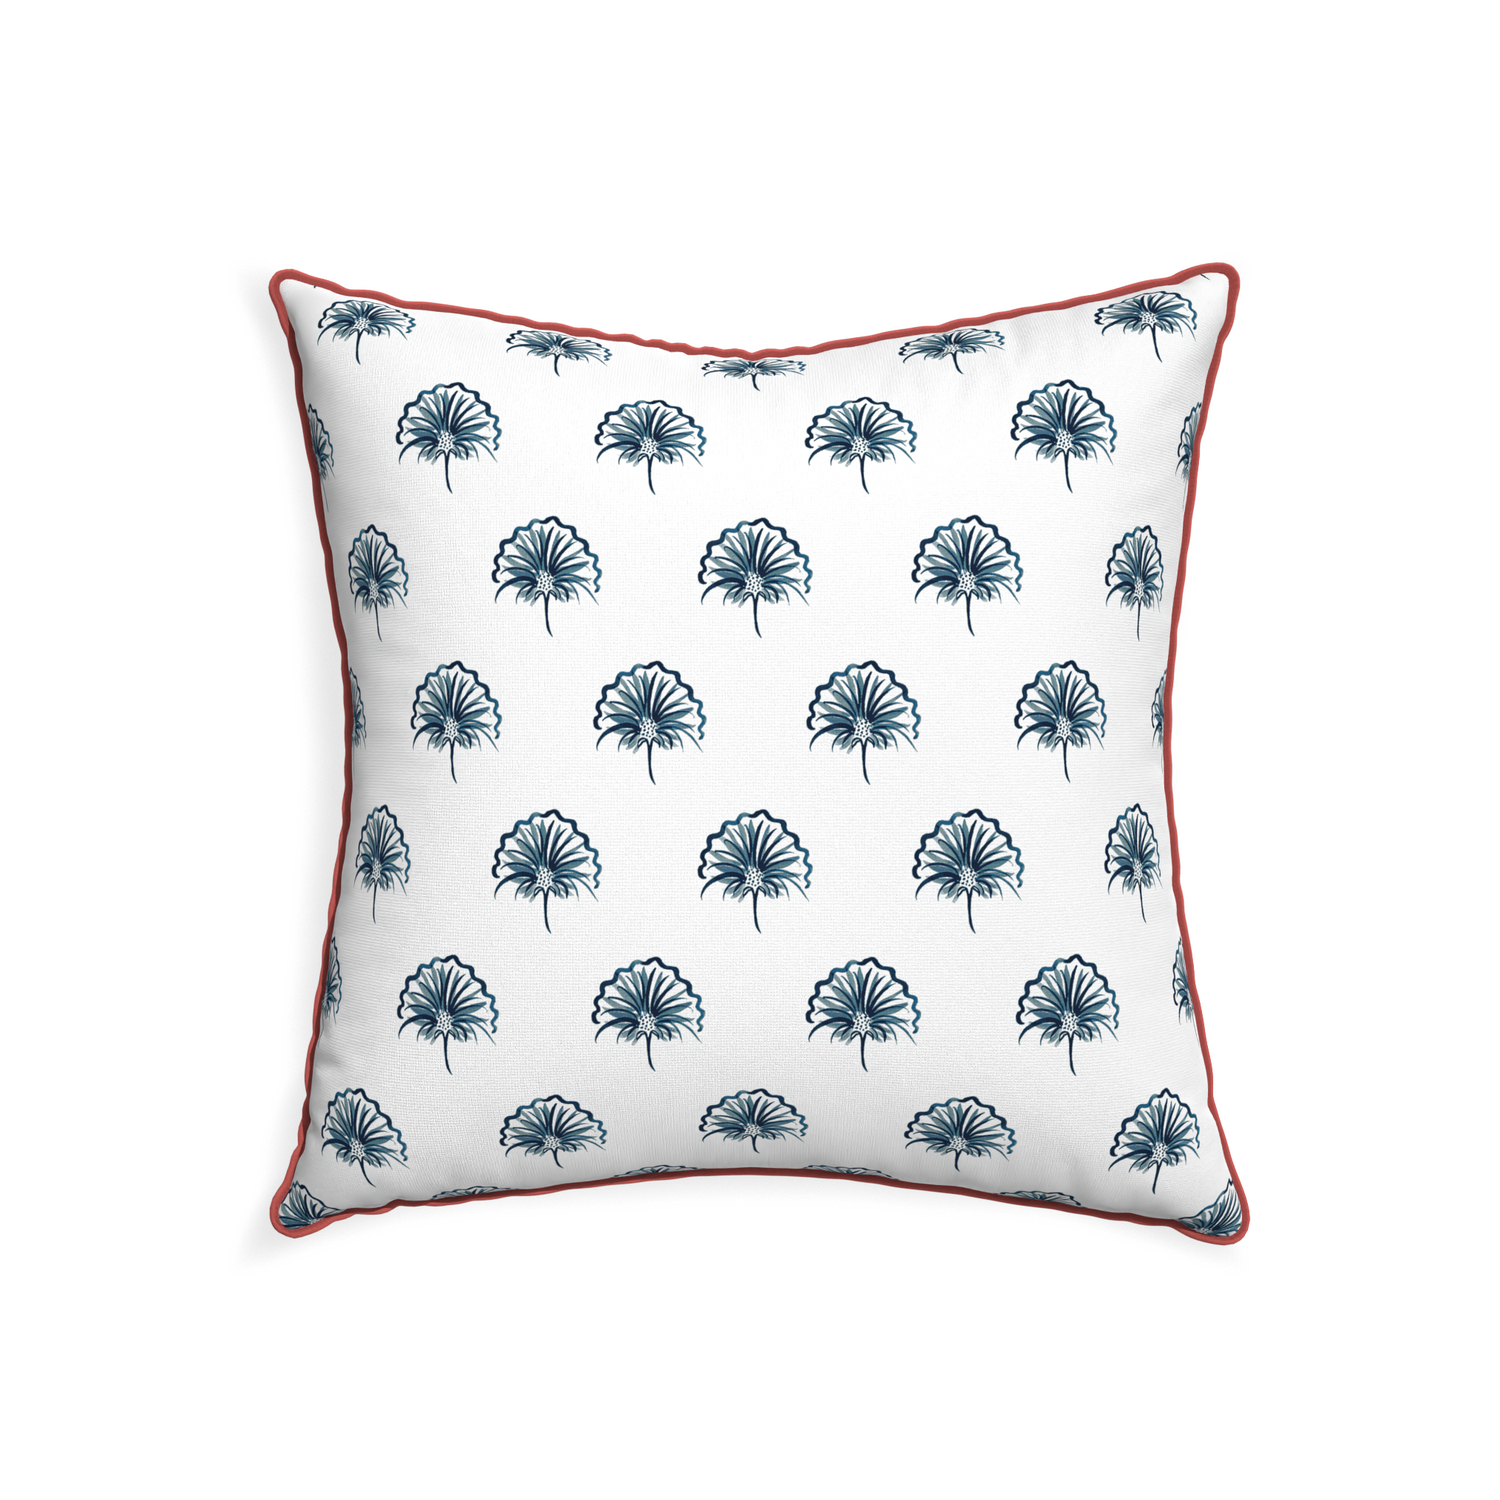 22-square penelope midnight custom pillow with c piping on white background